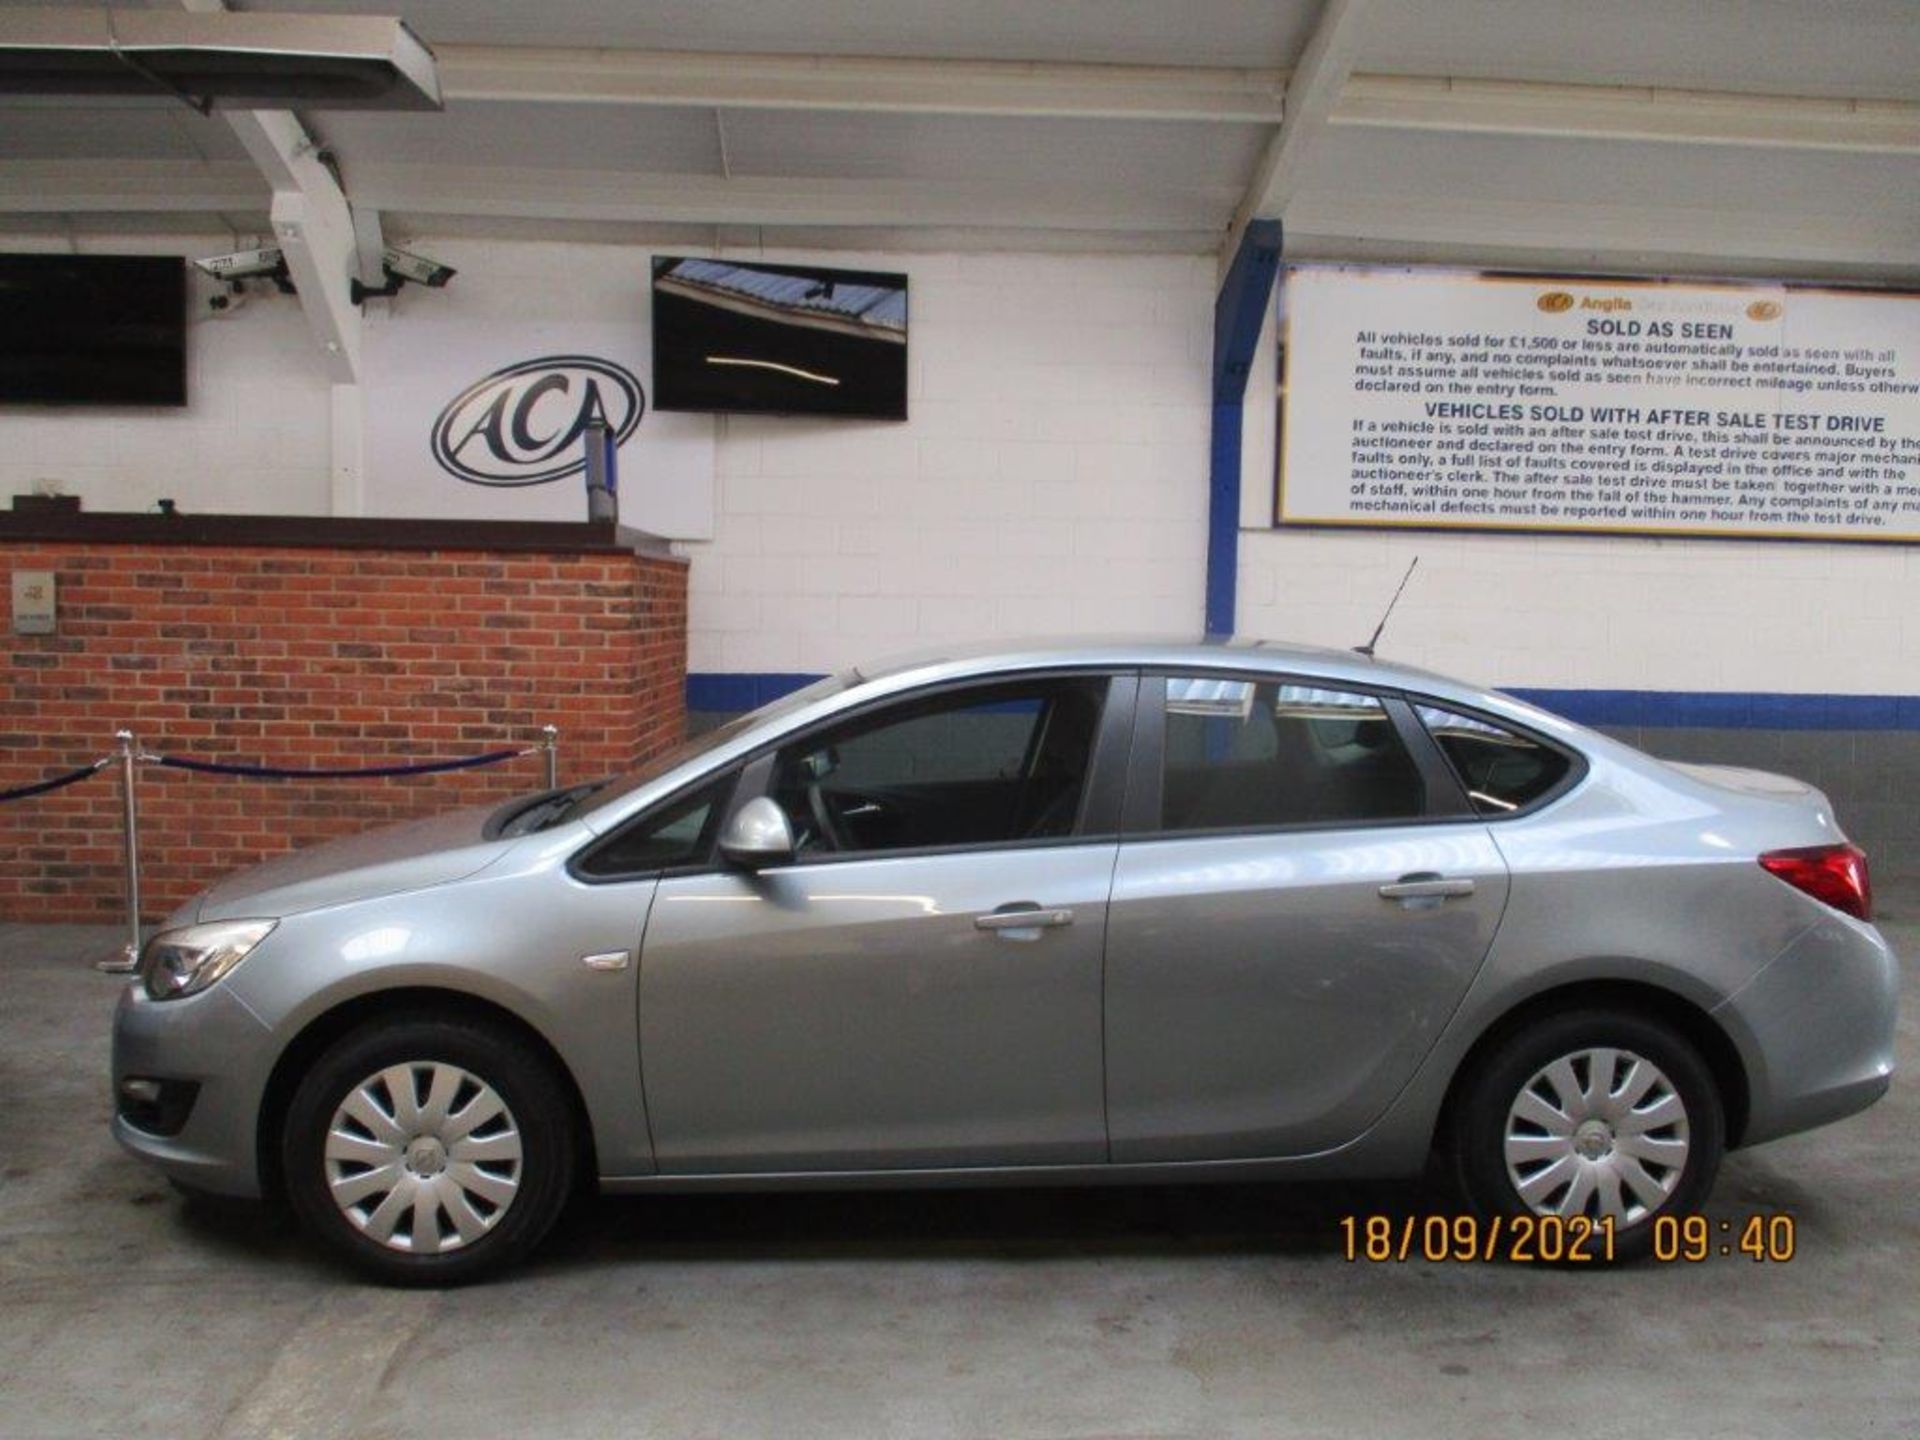 15 15 Opel Astra LHD - Image 2 of 20